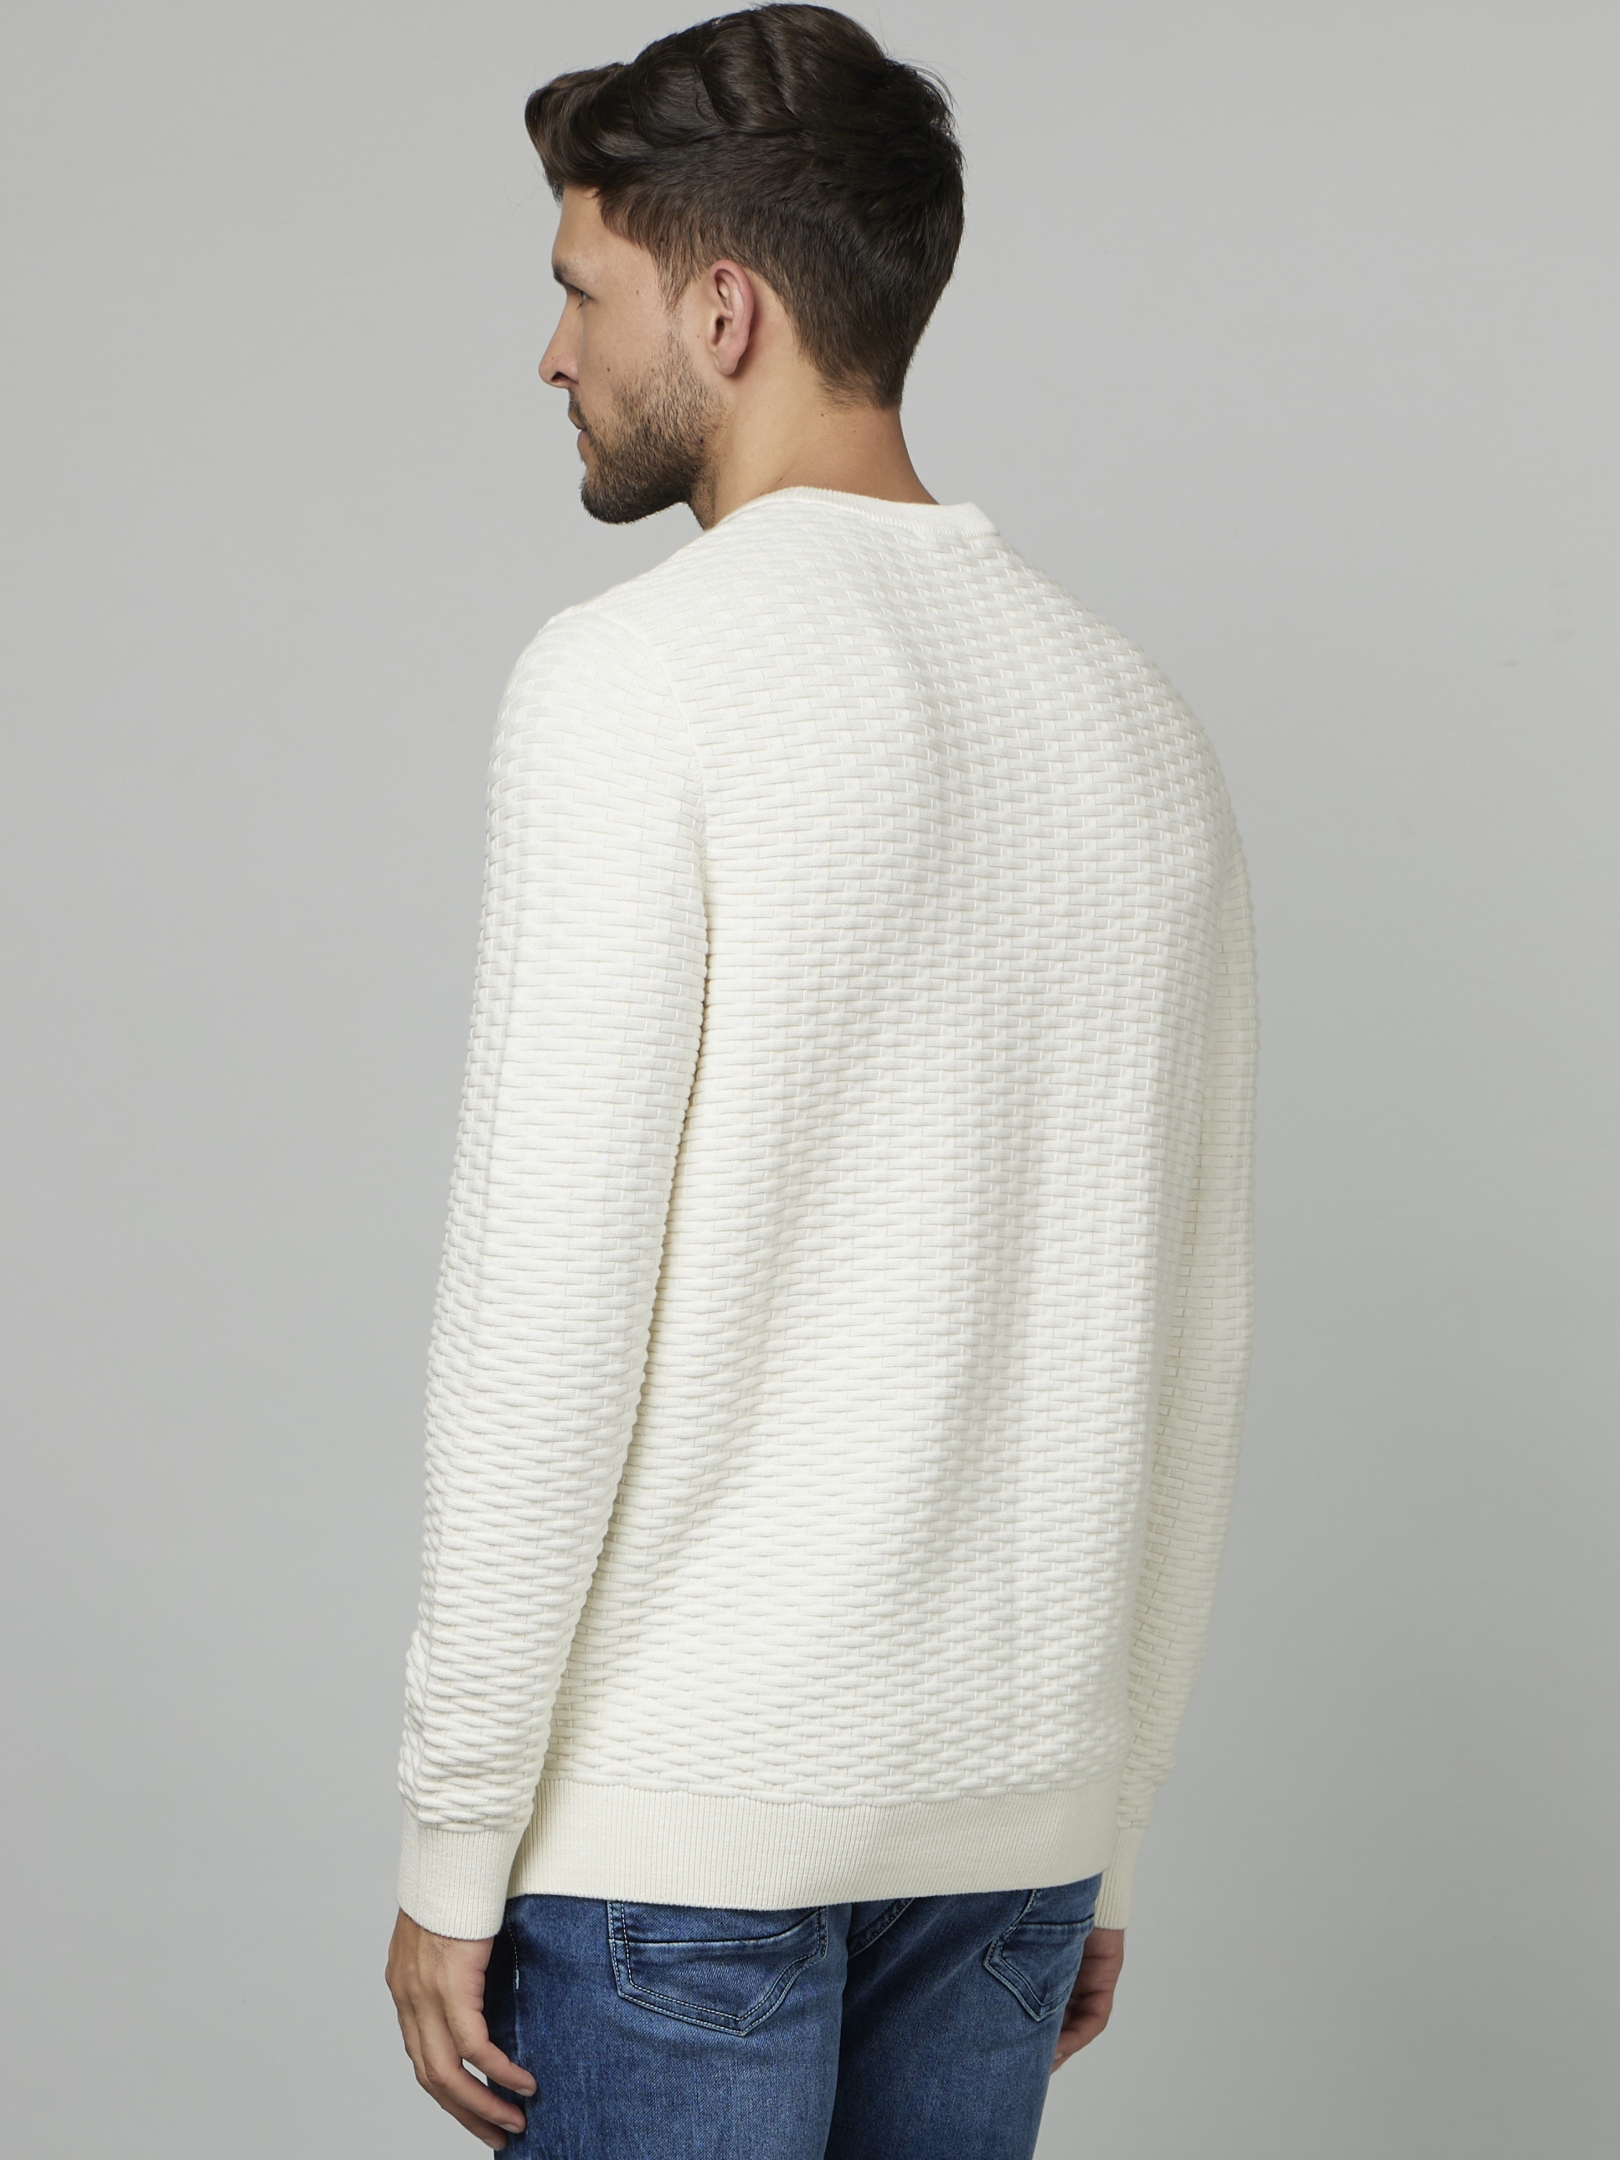 Men's White Solid Sweaters